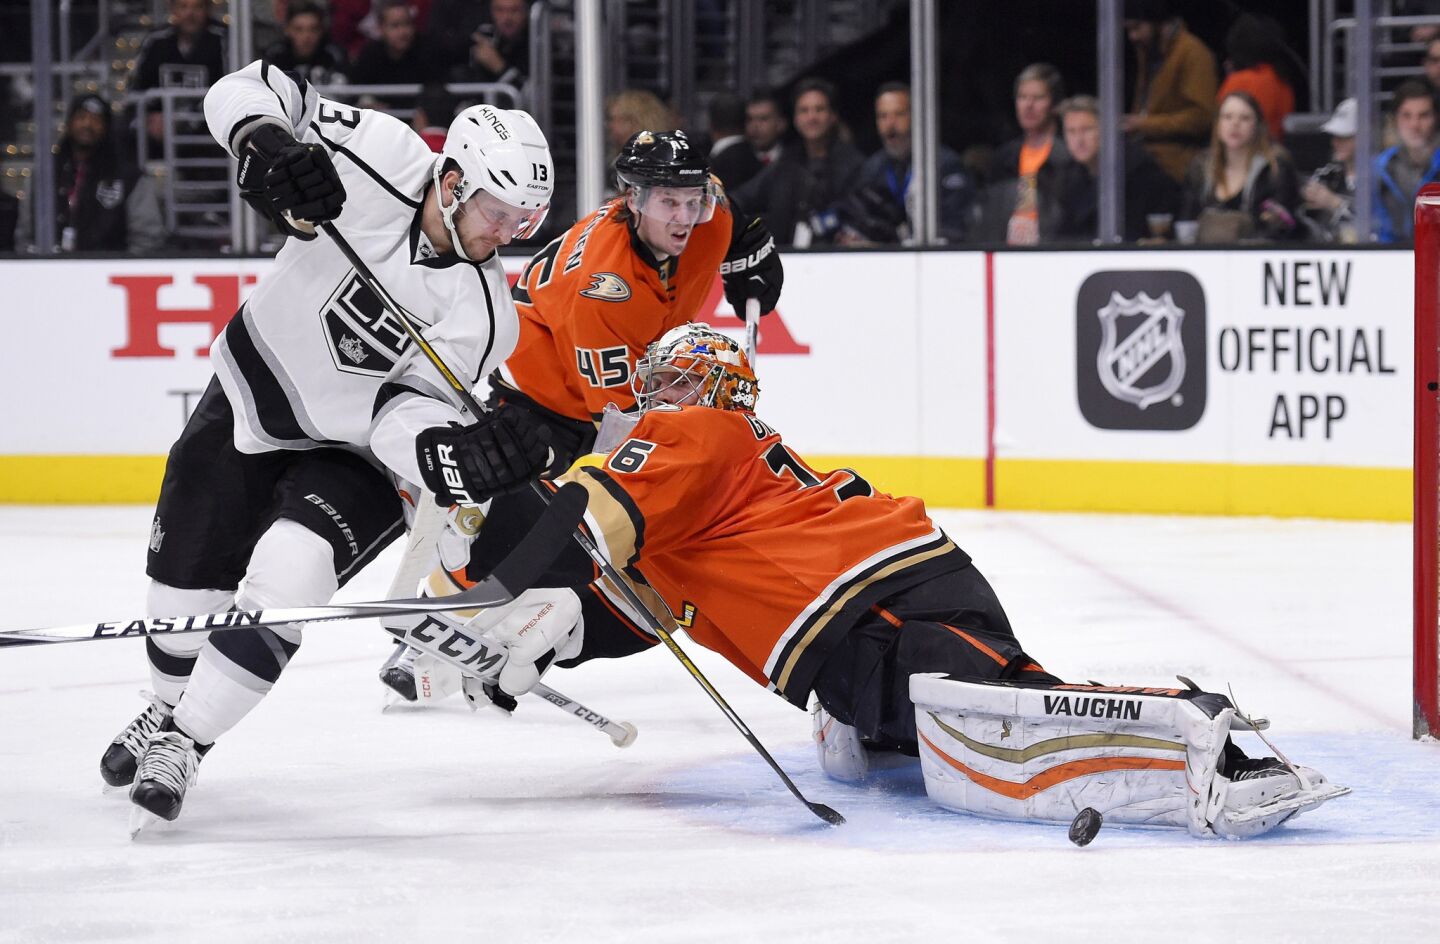 Kings left wing Kyle Clifford tries to beat Ducks goalie John Gibson and defenseman Sami Vatanen during the second period.